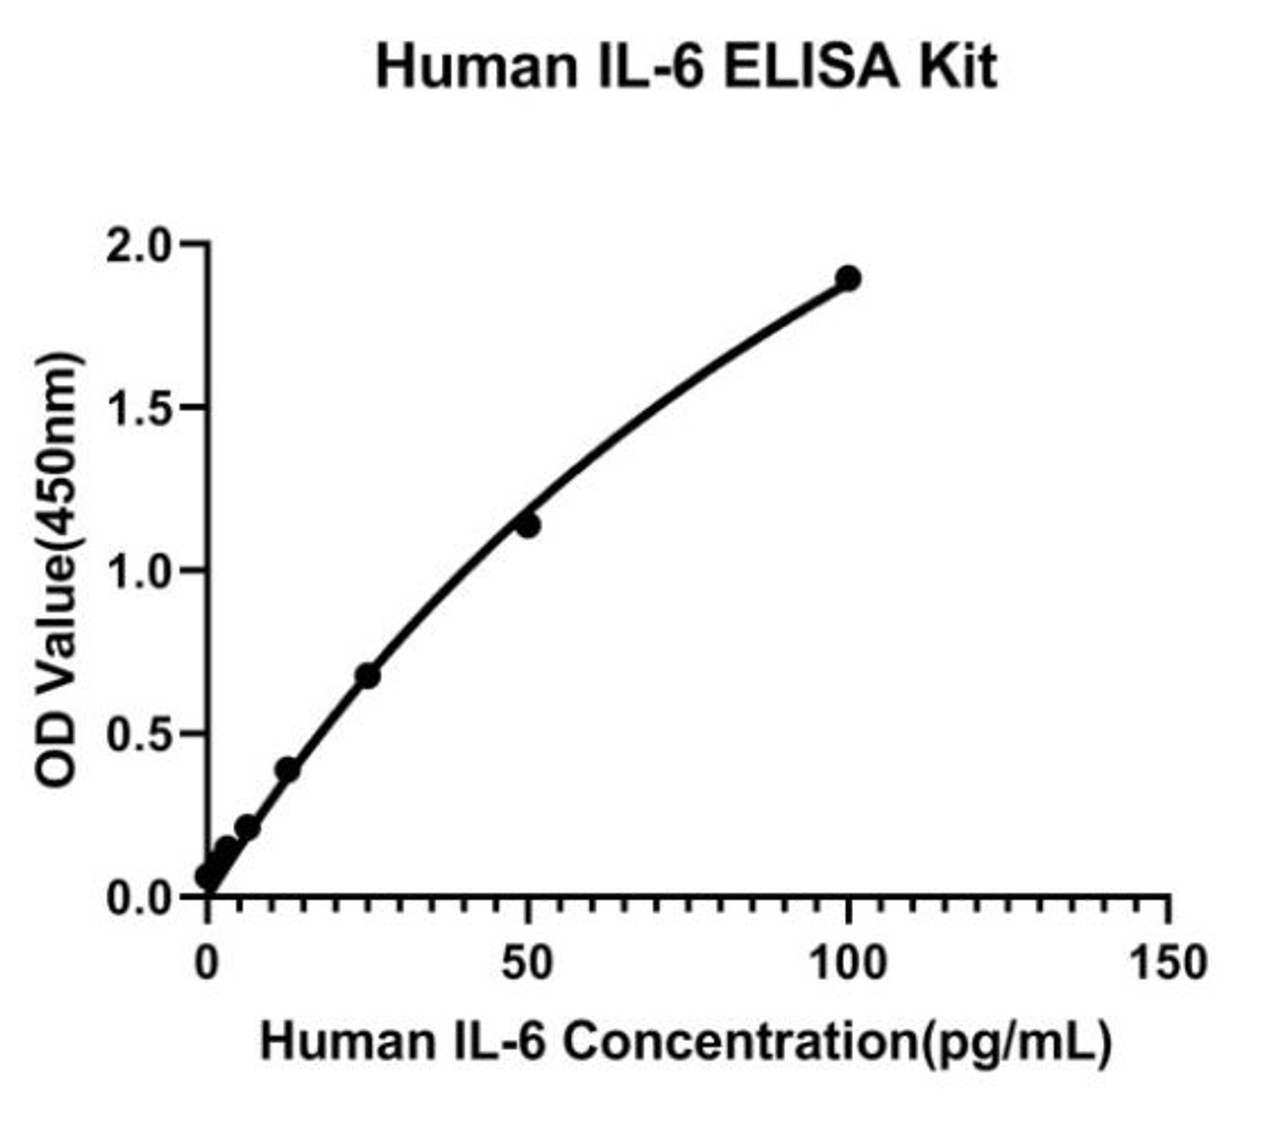 This assay recognizes natural and recombinant human IL-6.<br>The factors listed below were prepared at 10 ng/mL in calibrator diluent and assayed for cross-reactivity. Preparations of the following factors at 10 ng/mL in a mid-range recombinant human IL-6 control were assayed for interference. No significant cross-reactivity or interference was observed.